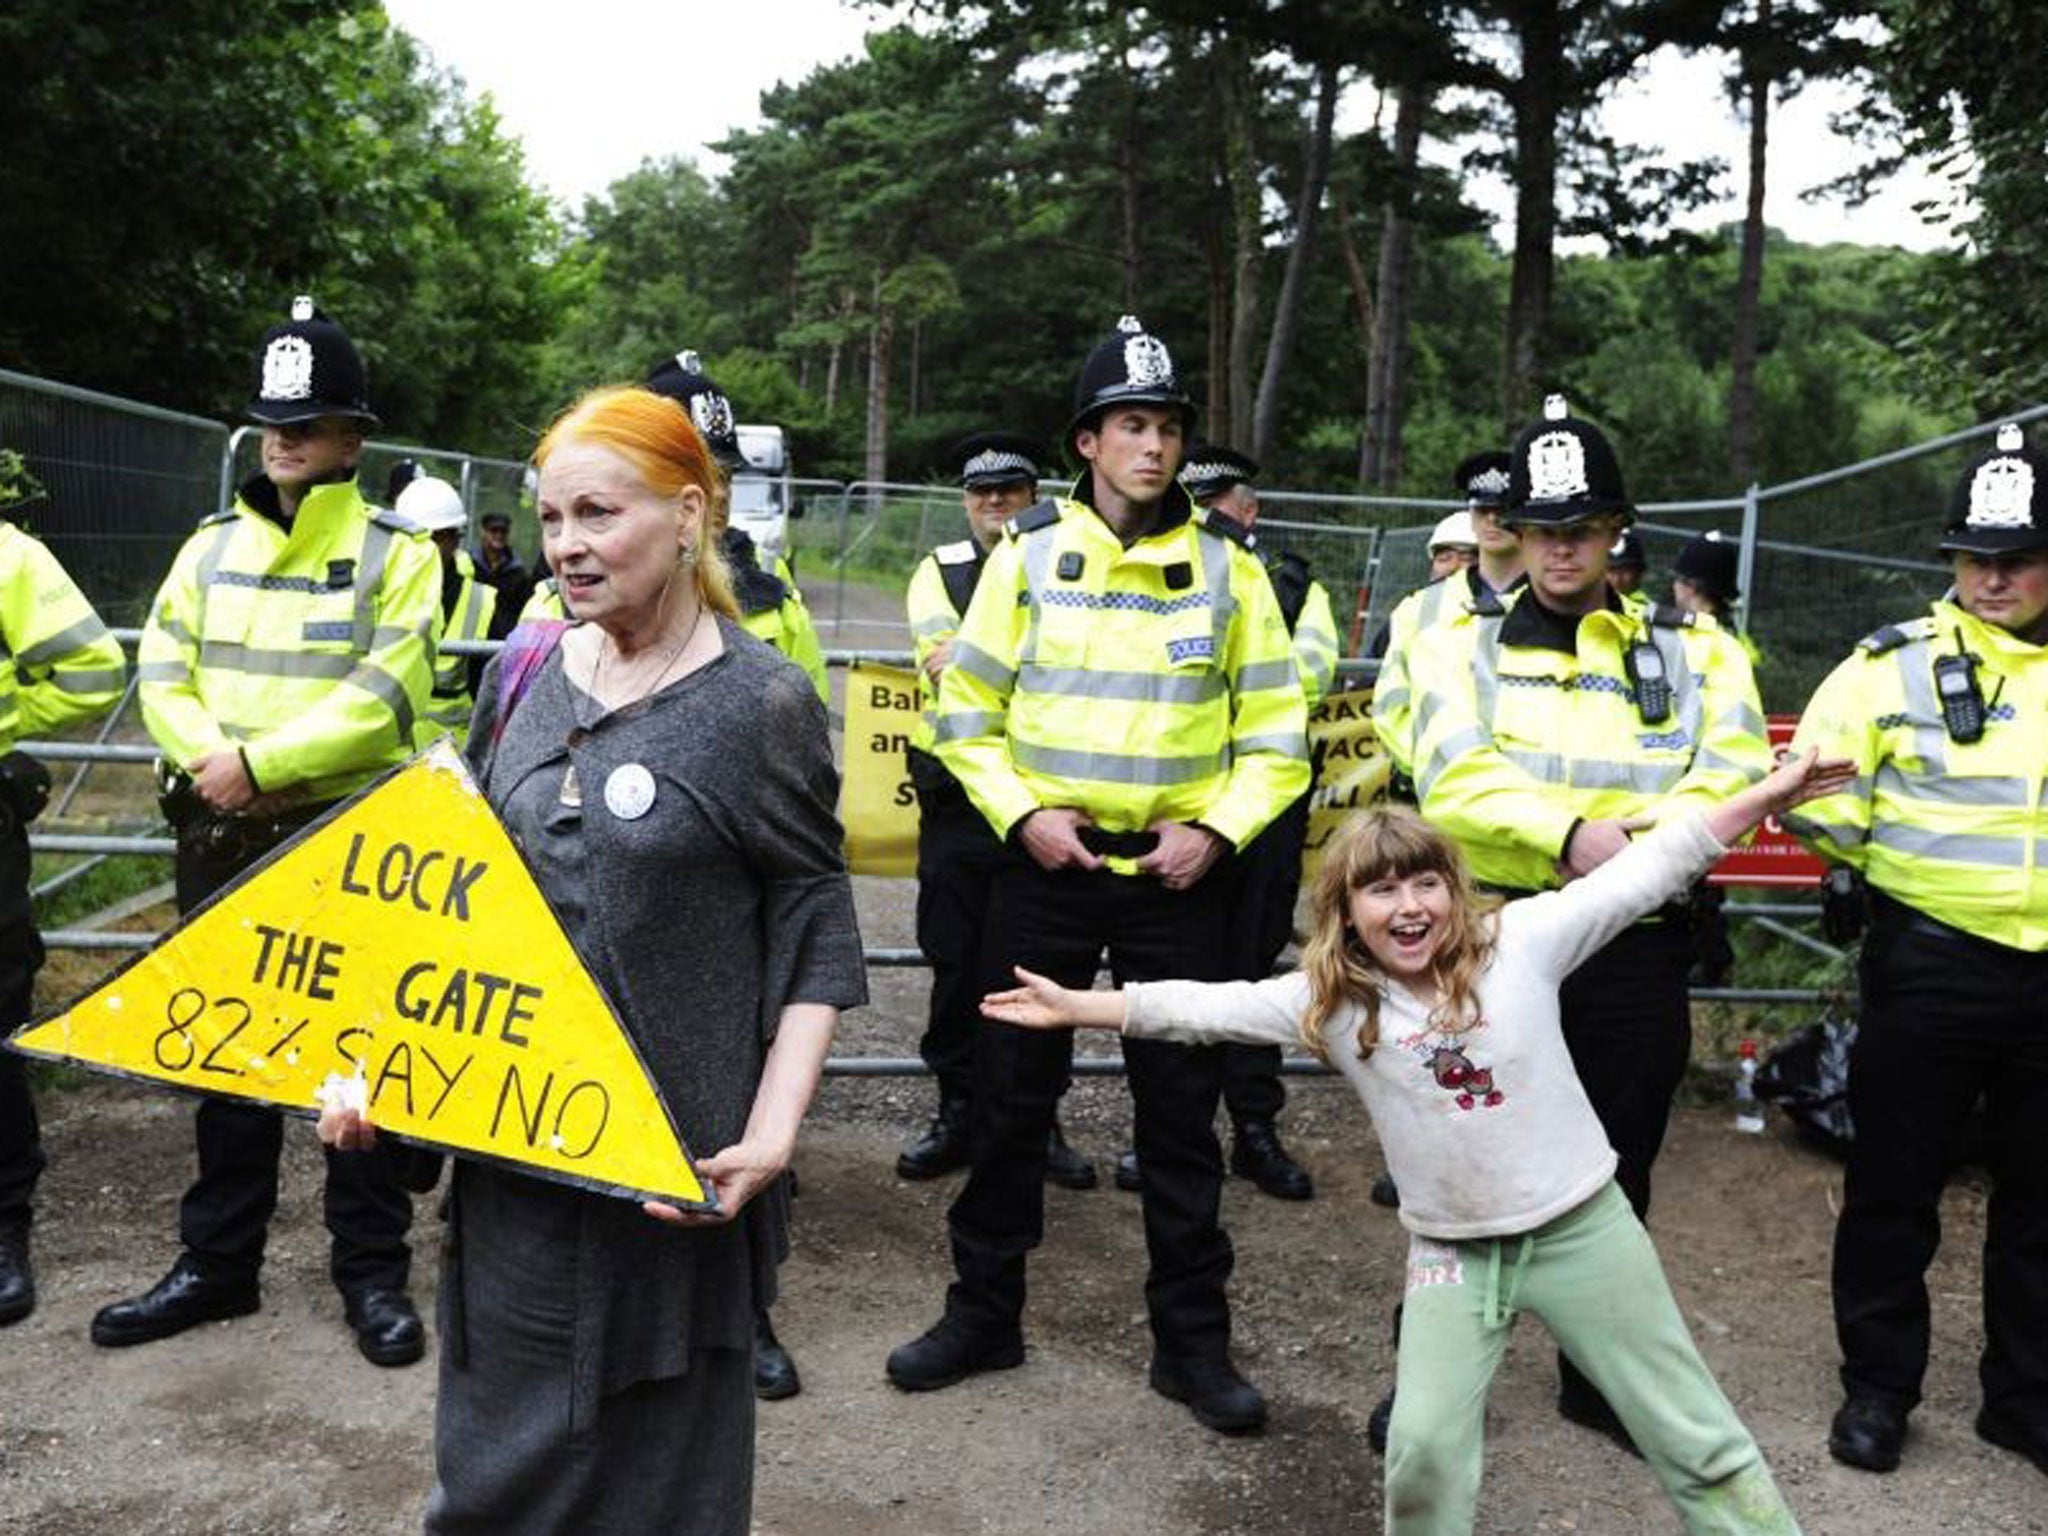 Britain's designer and activist Vivienne Westwood visited protests at the entrance of the Cuadrilla Resources site in Balcombe West Sussex on Friday.